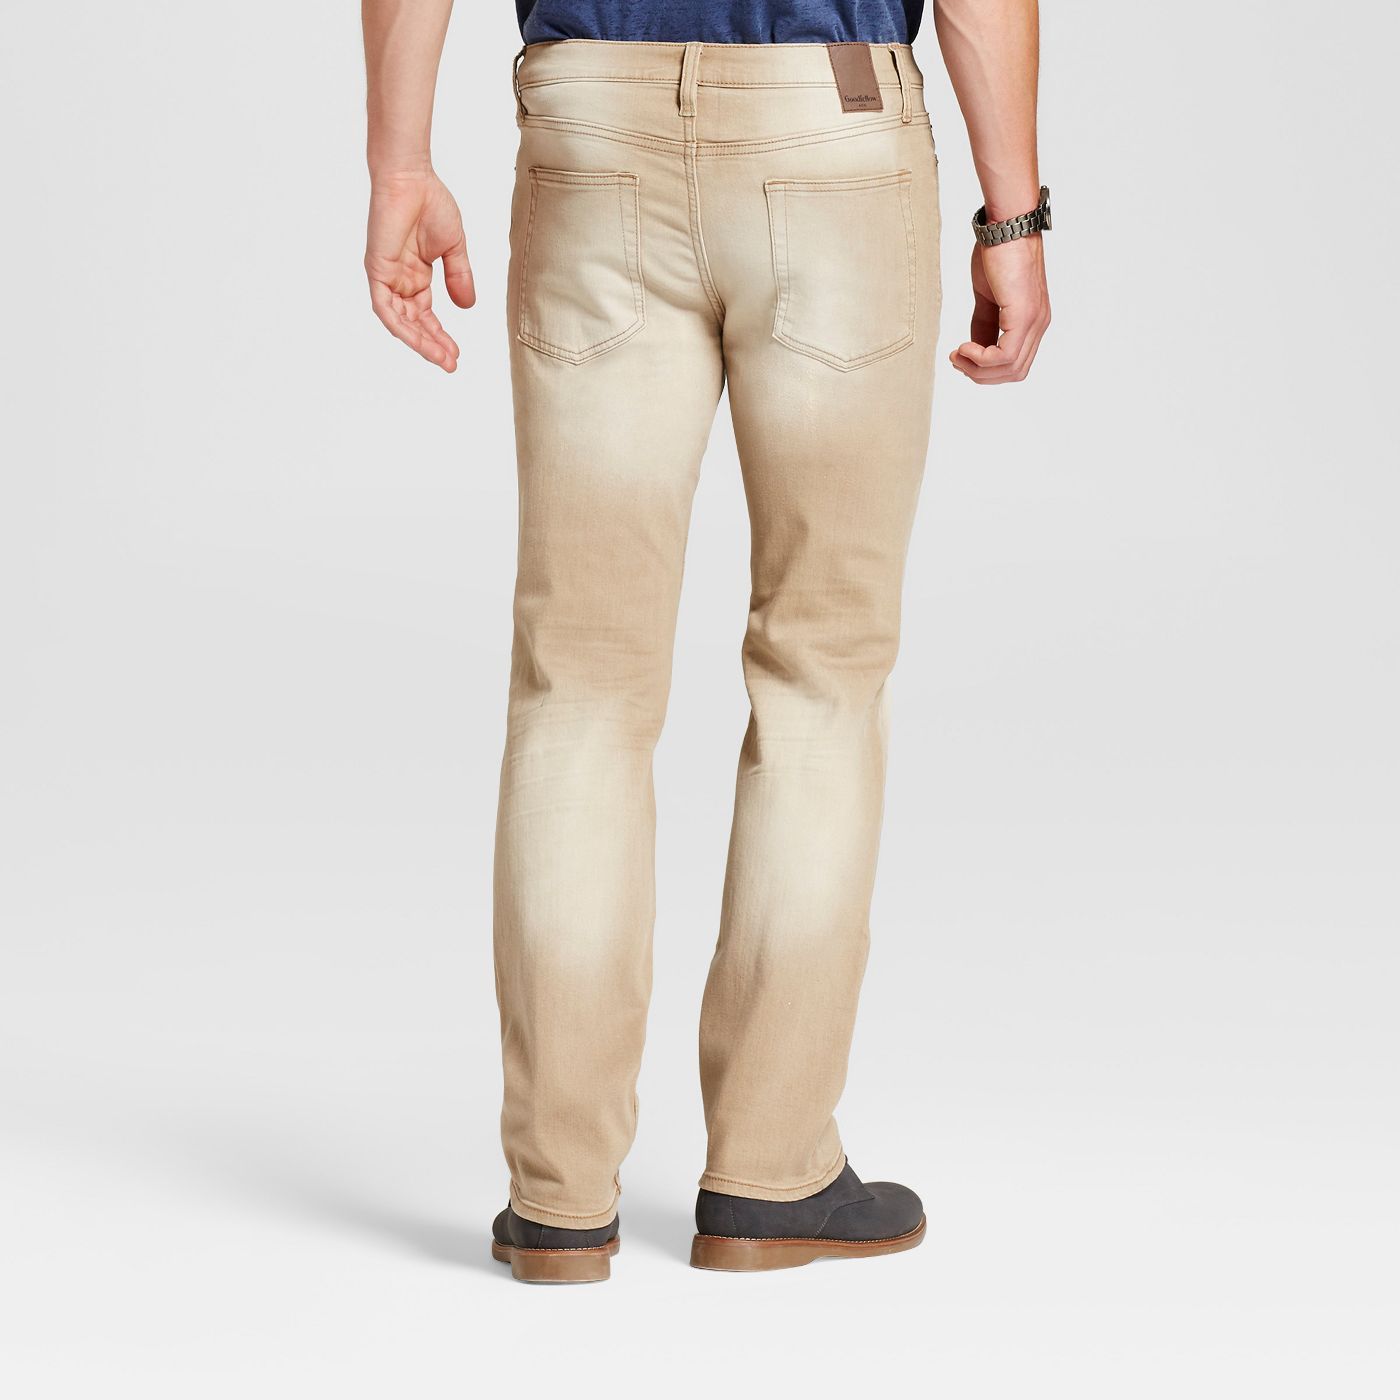 goodfellow tapered jeans